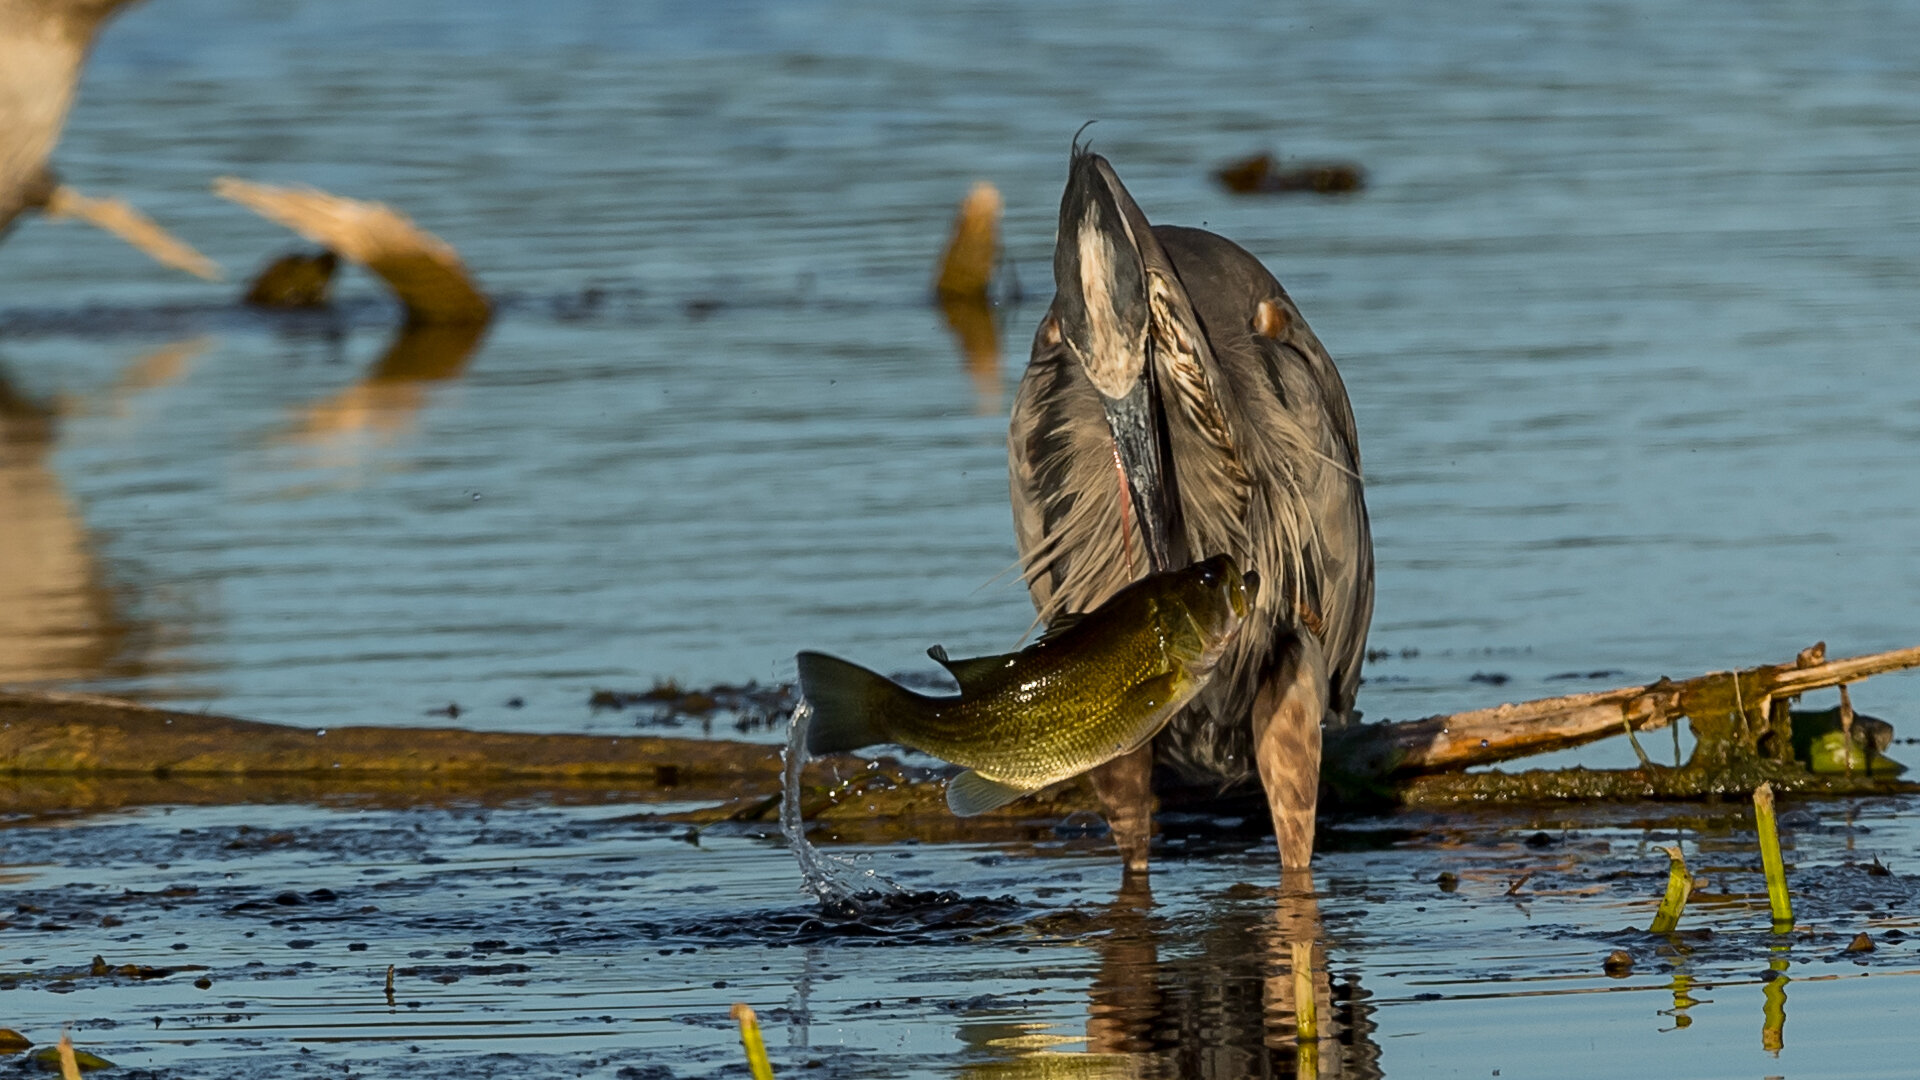 017 The bass fights hard but the heron somehow manhandles it.jpg